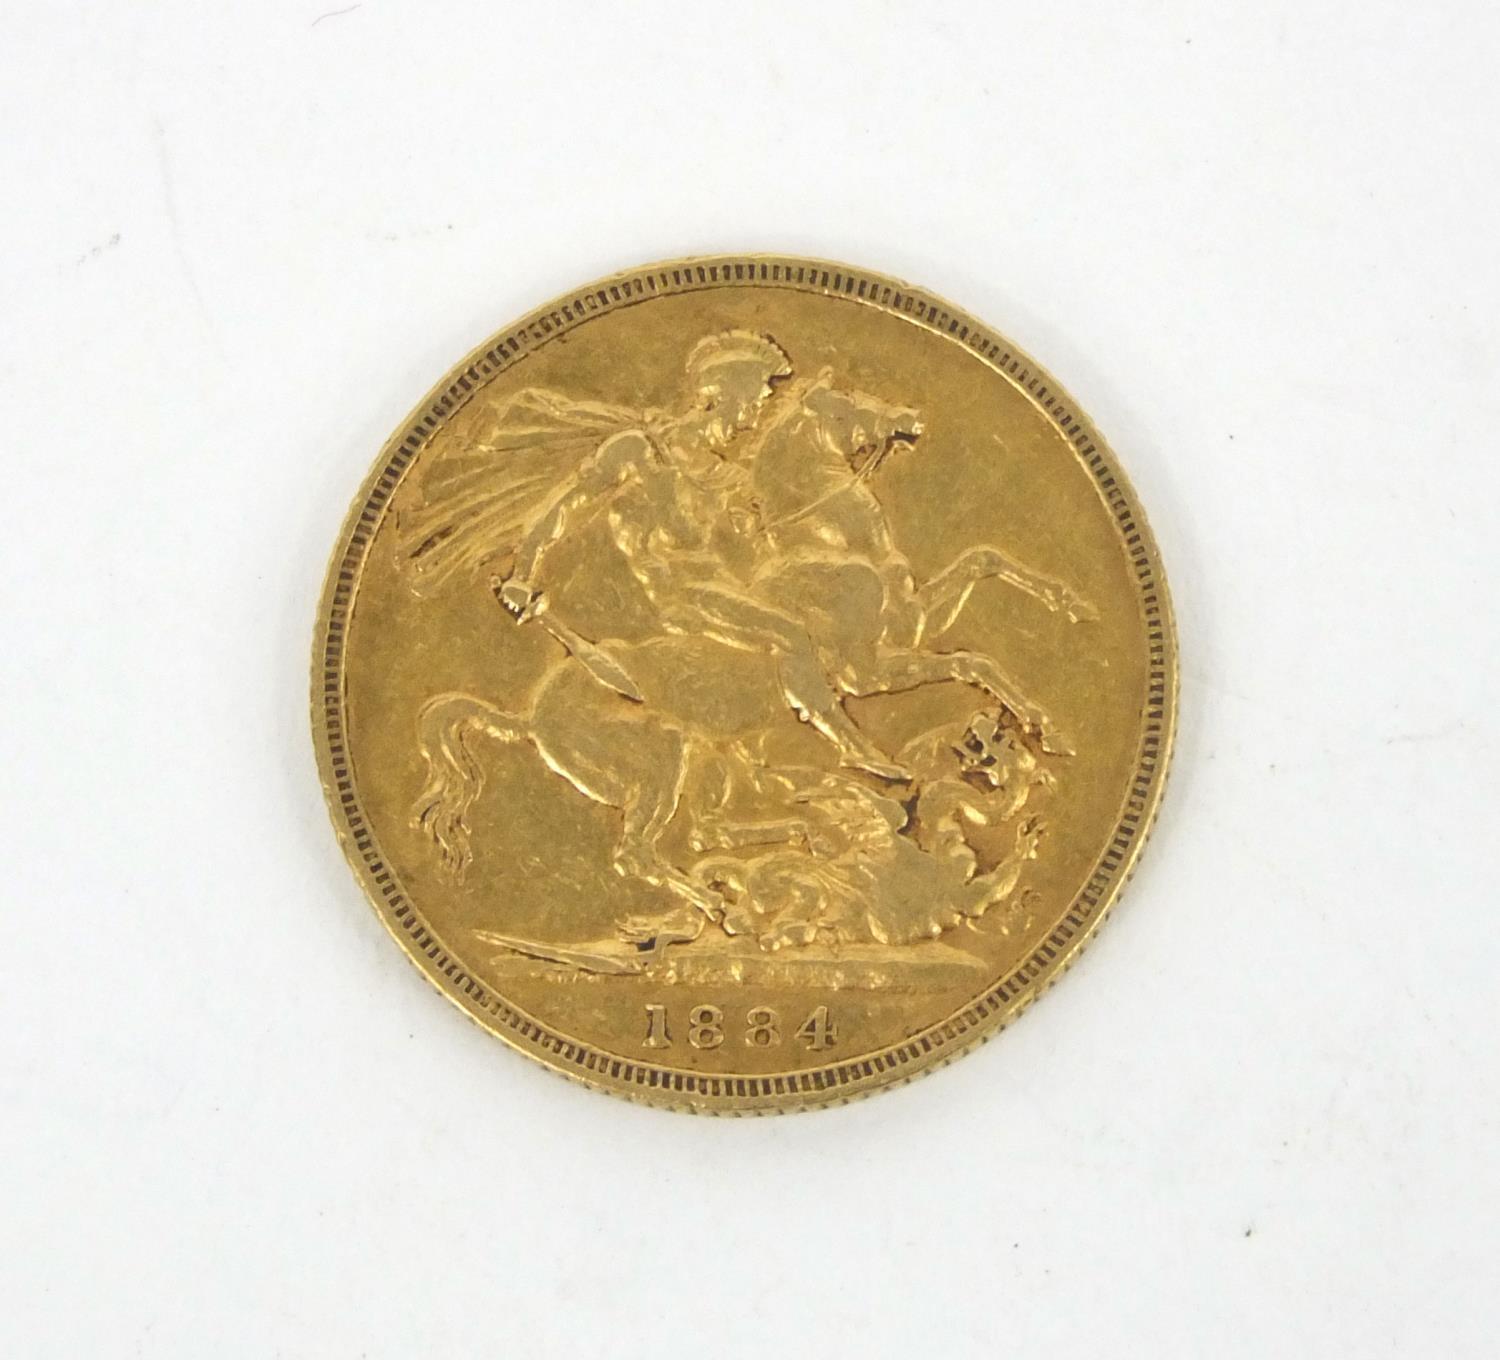 Queen Victoria 1884 gold sovereign - Image 2 of 3